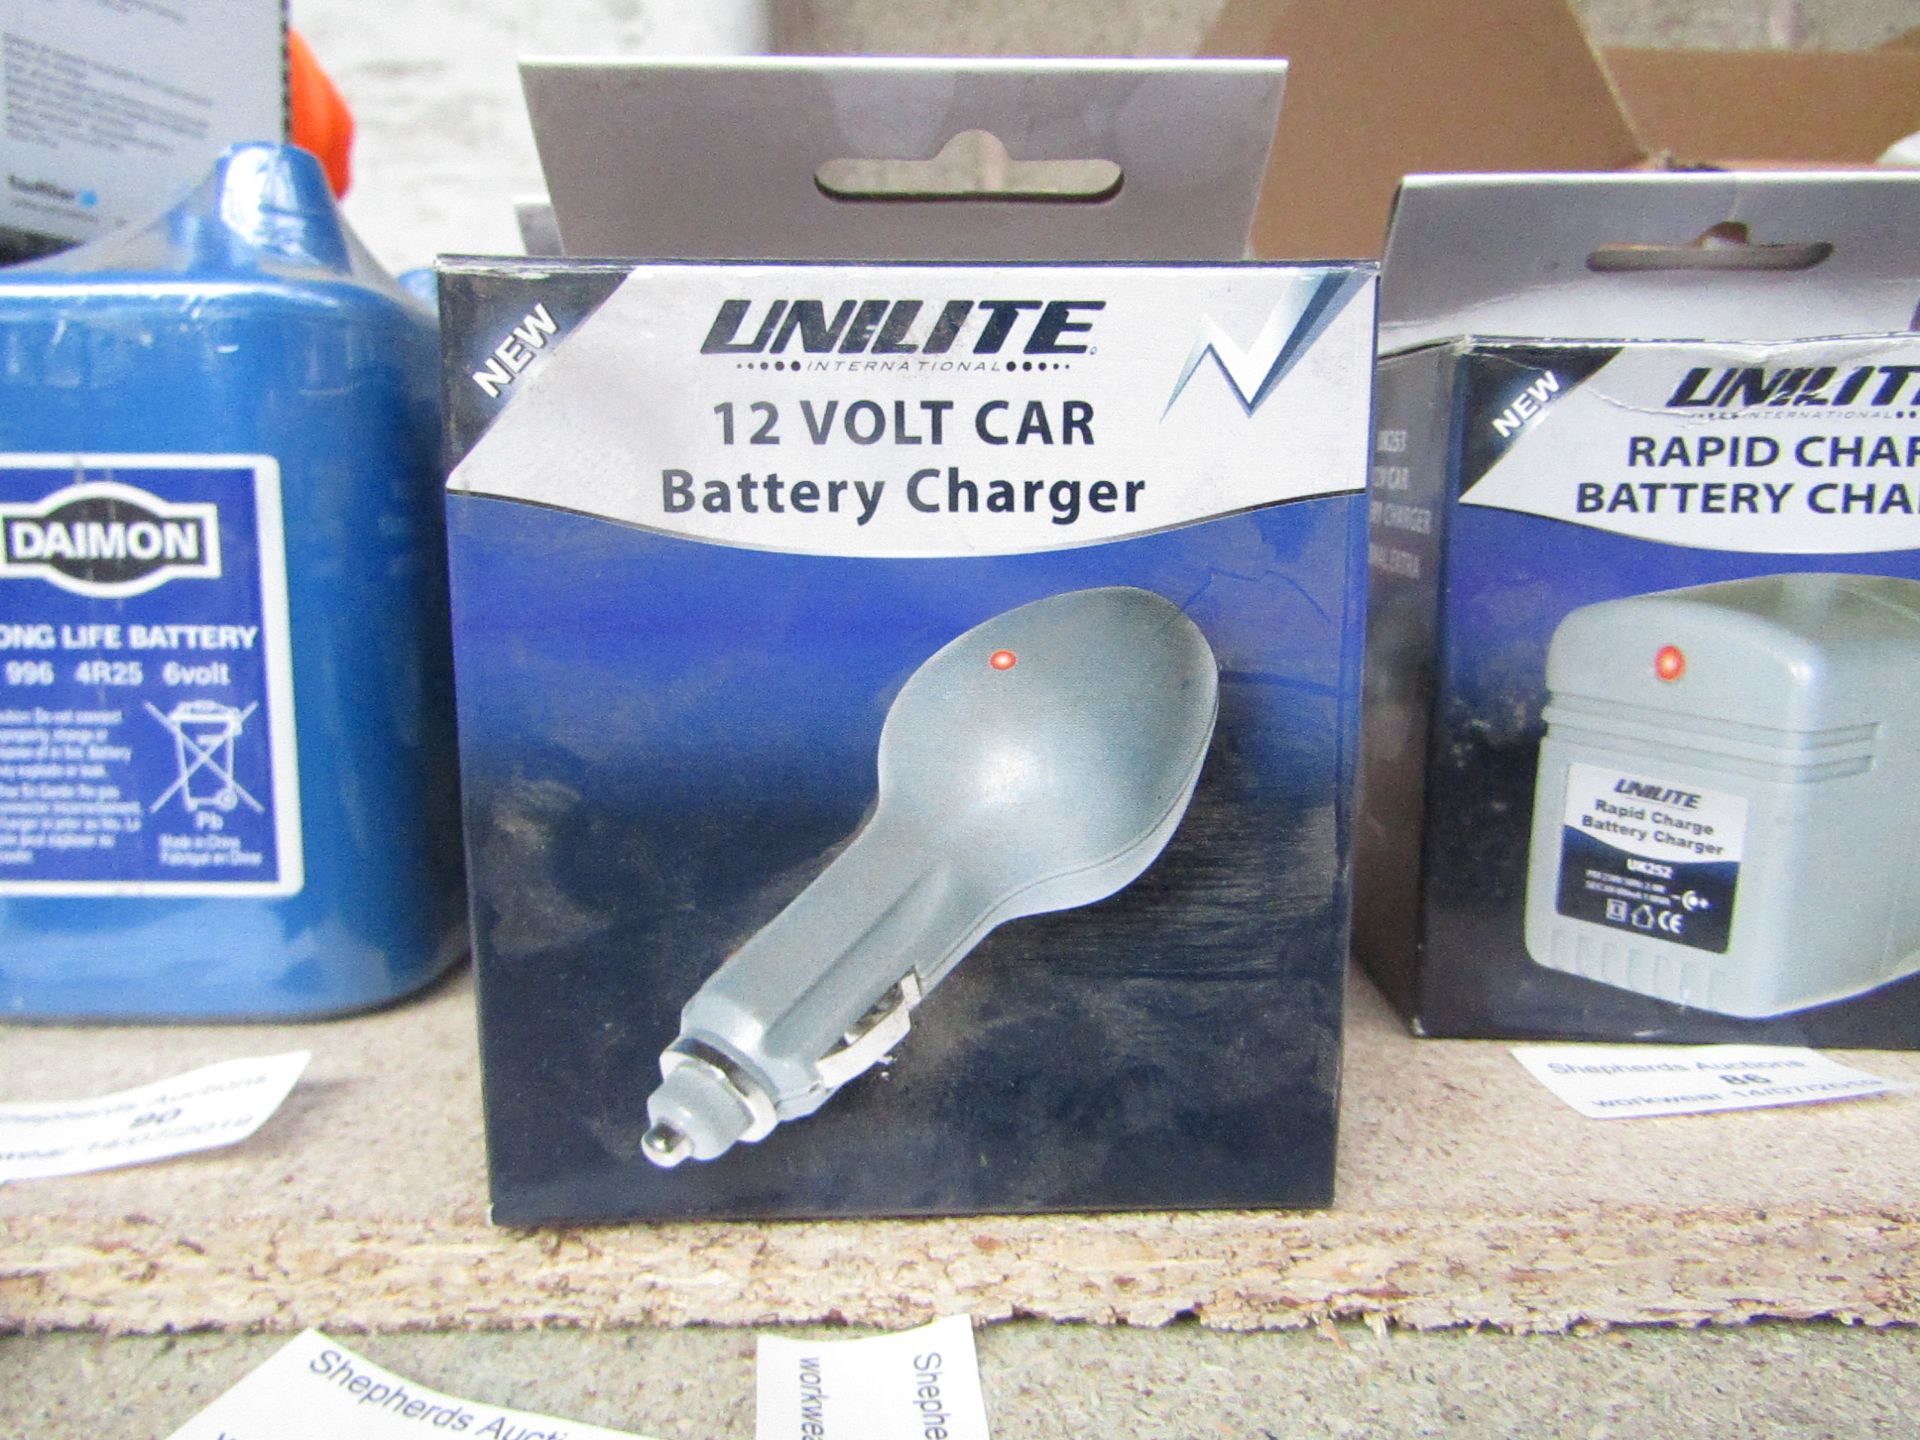 Unilite 12V Car Charger both new & packaged